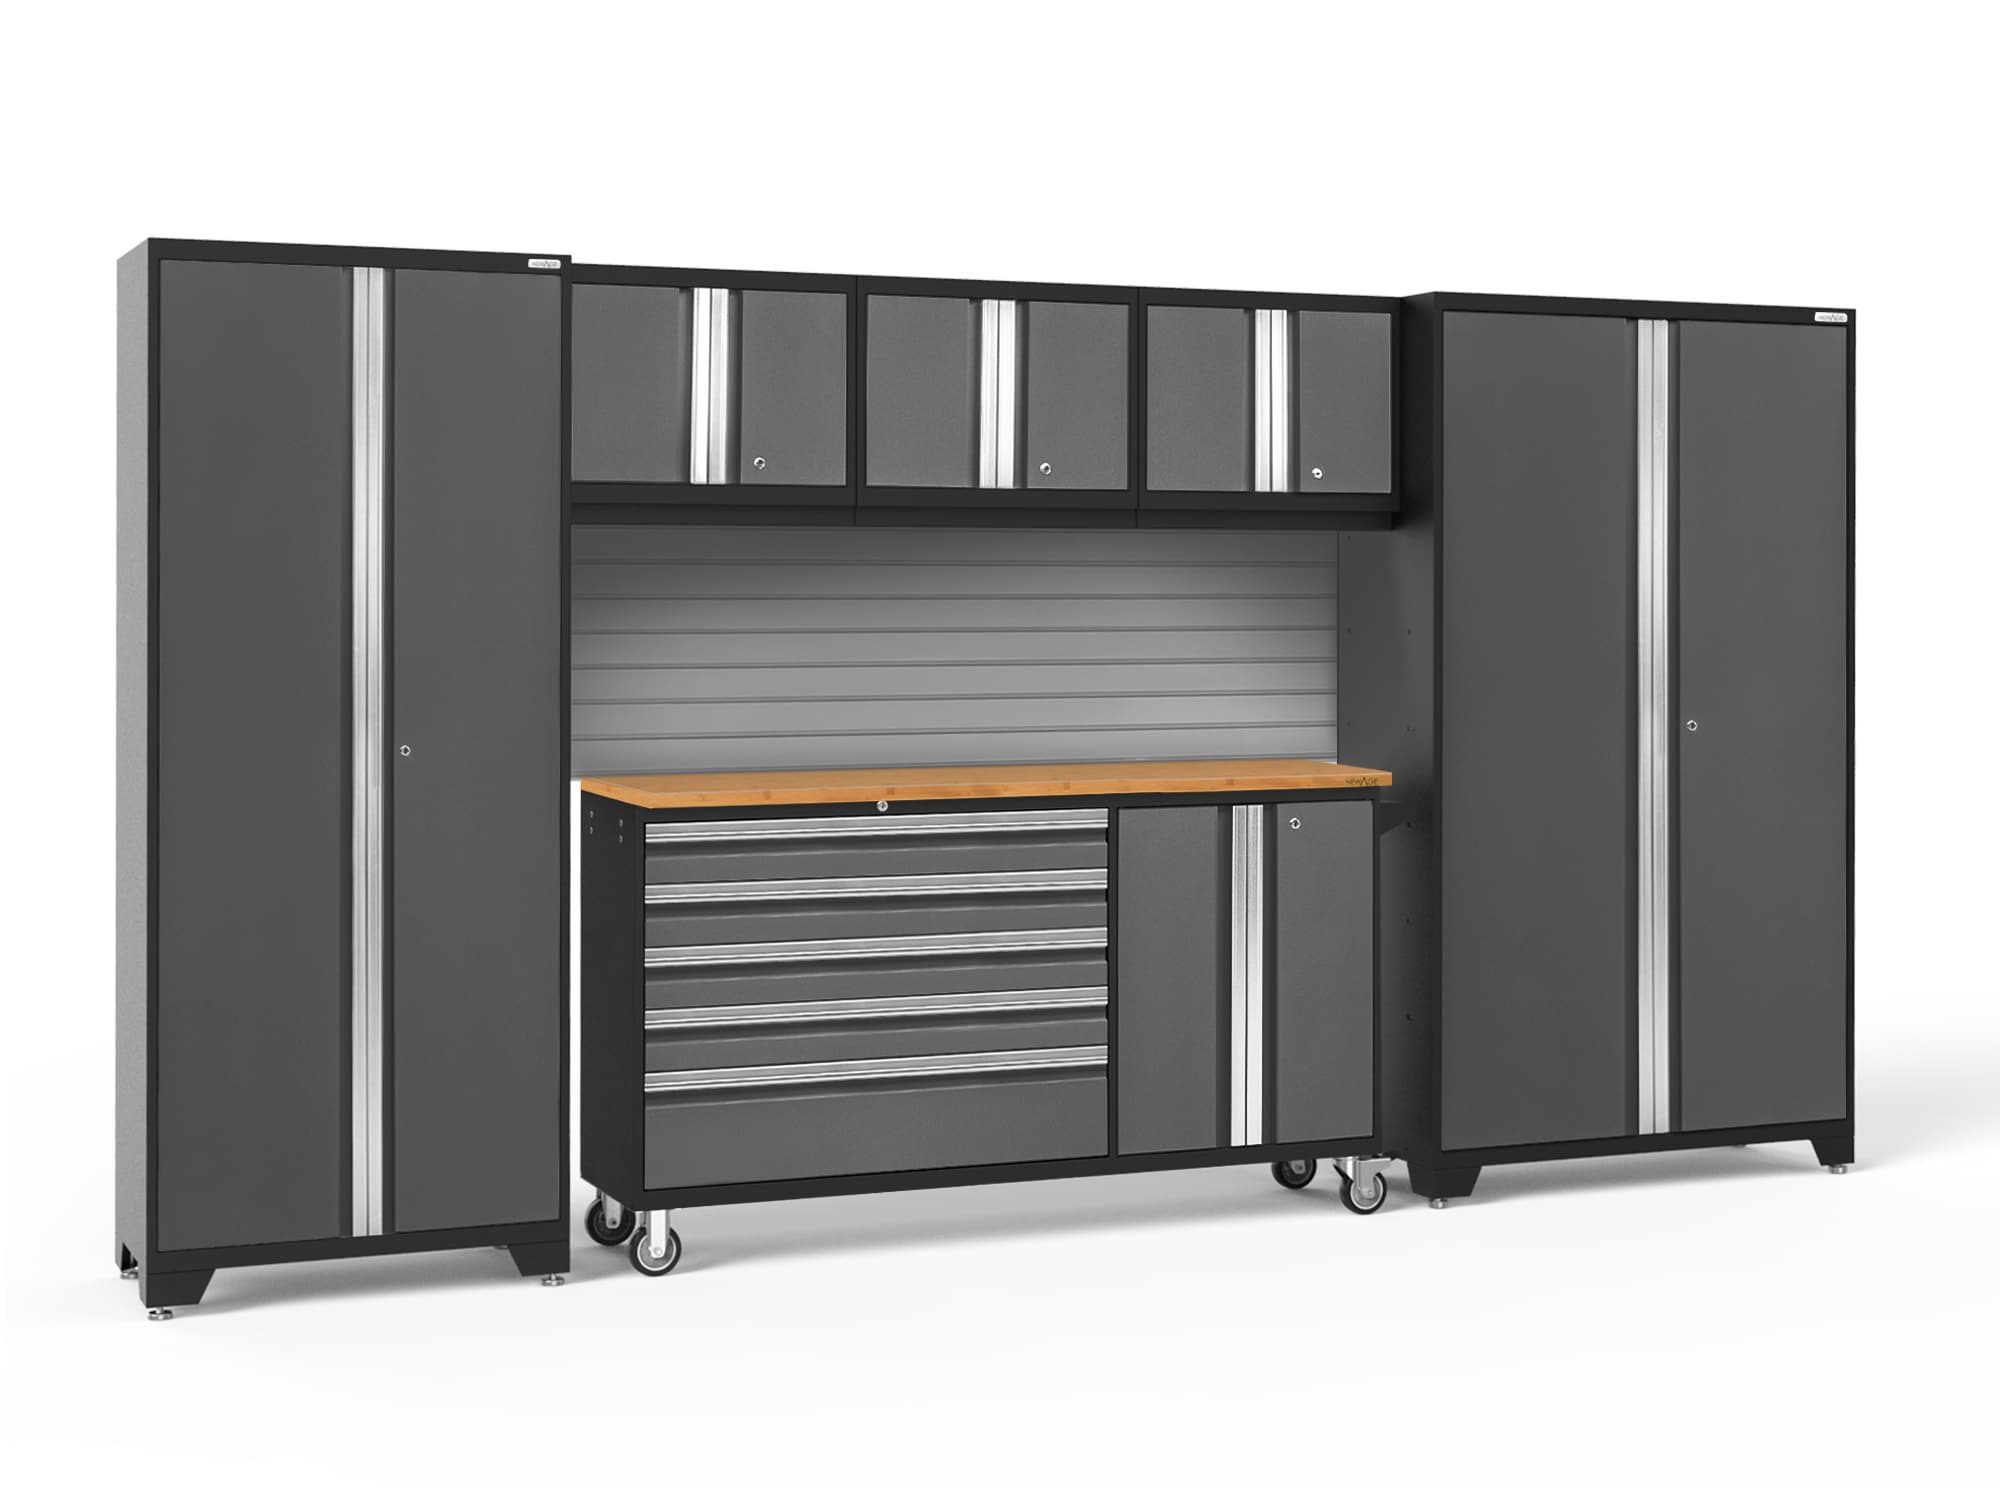 6-Cabinets Steel Garage Storage System in Charcoal Gray (144-in W x 77.25-in H) | - NewAge Products 50488